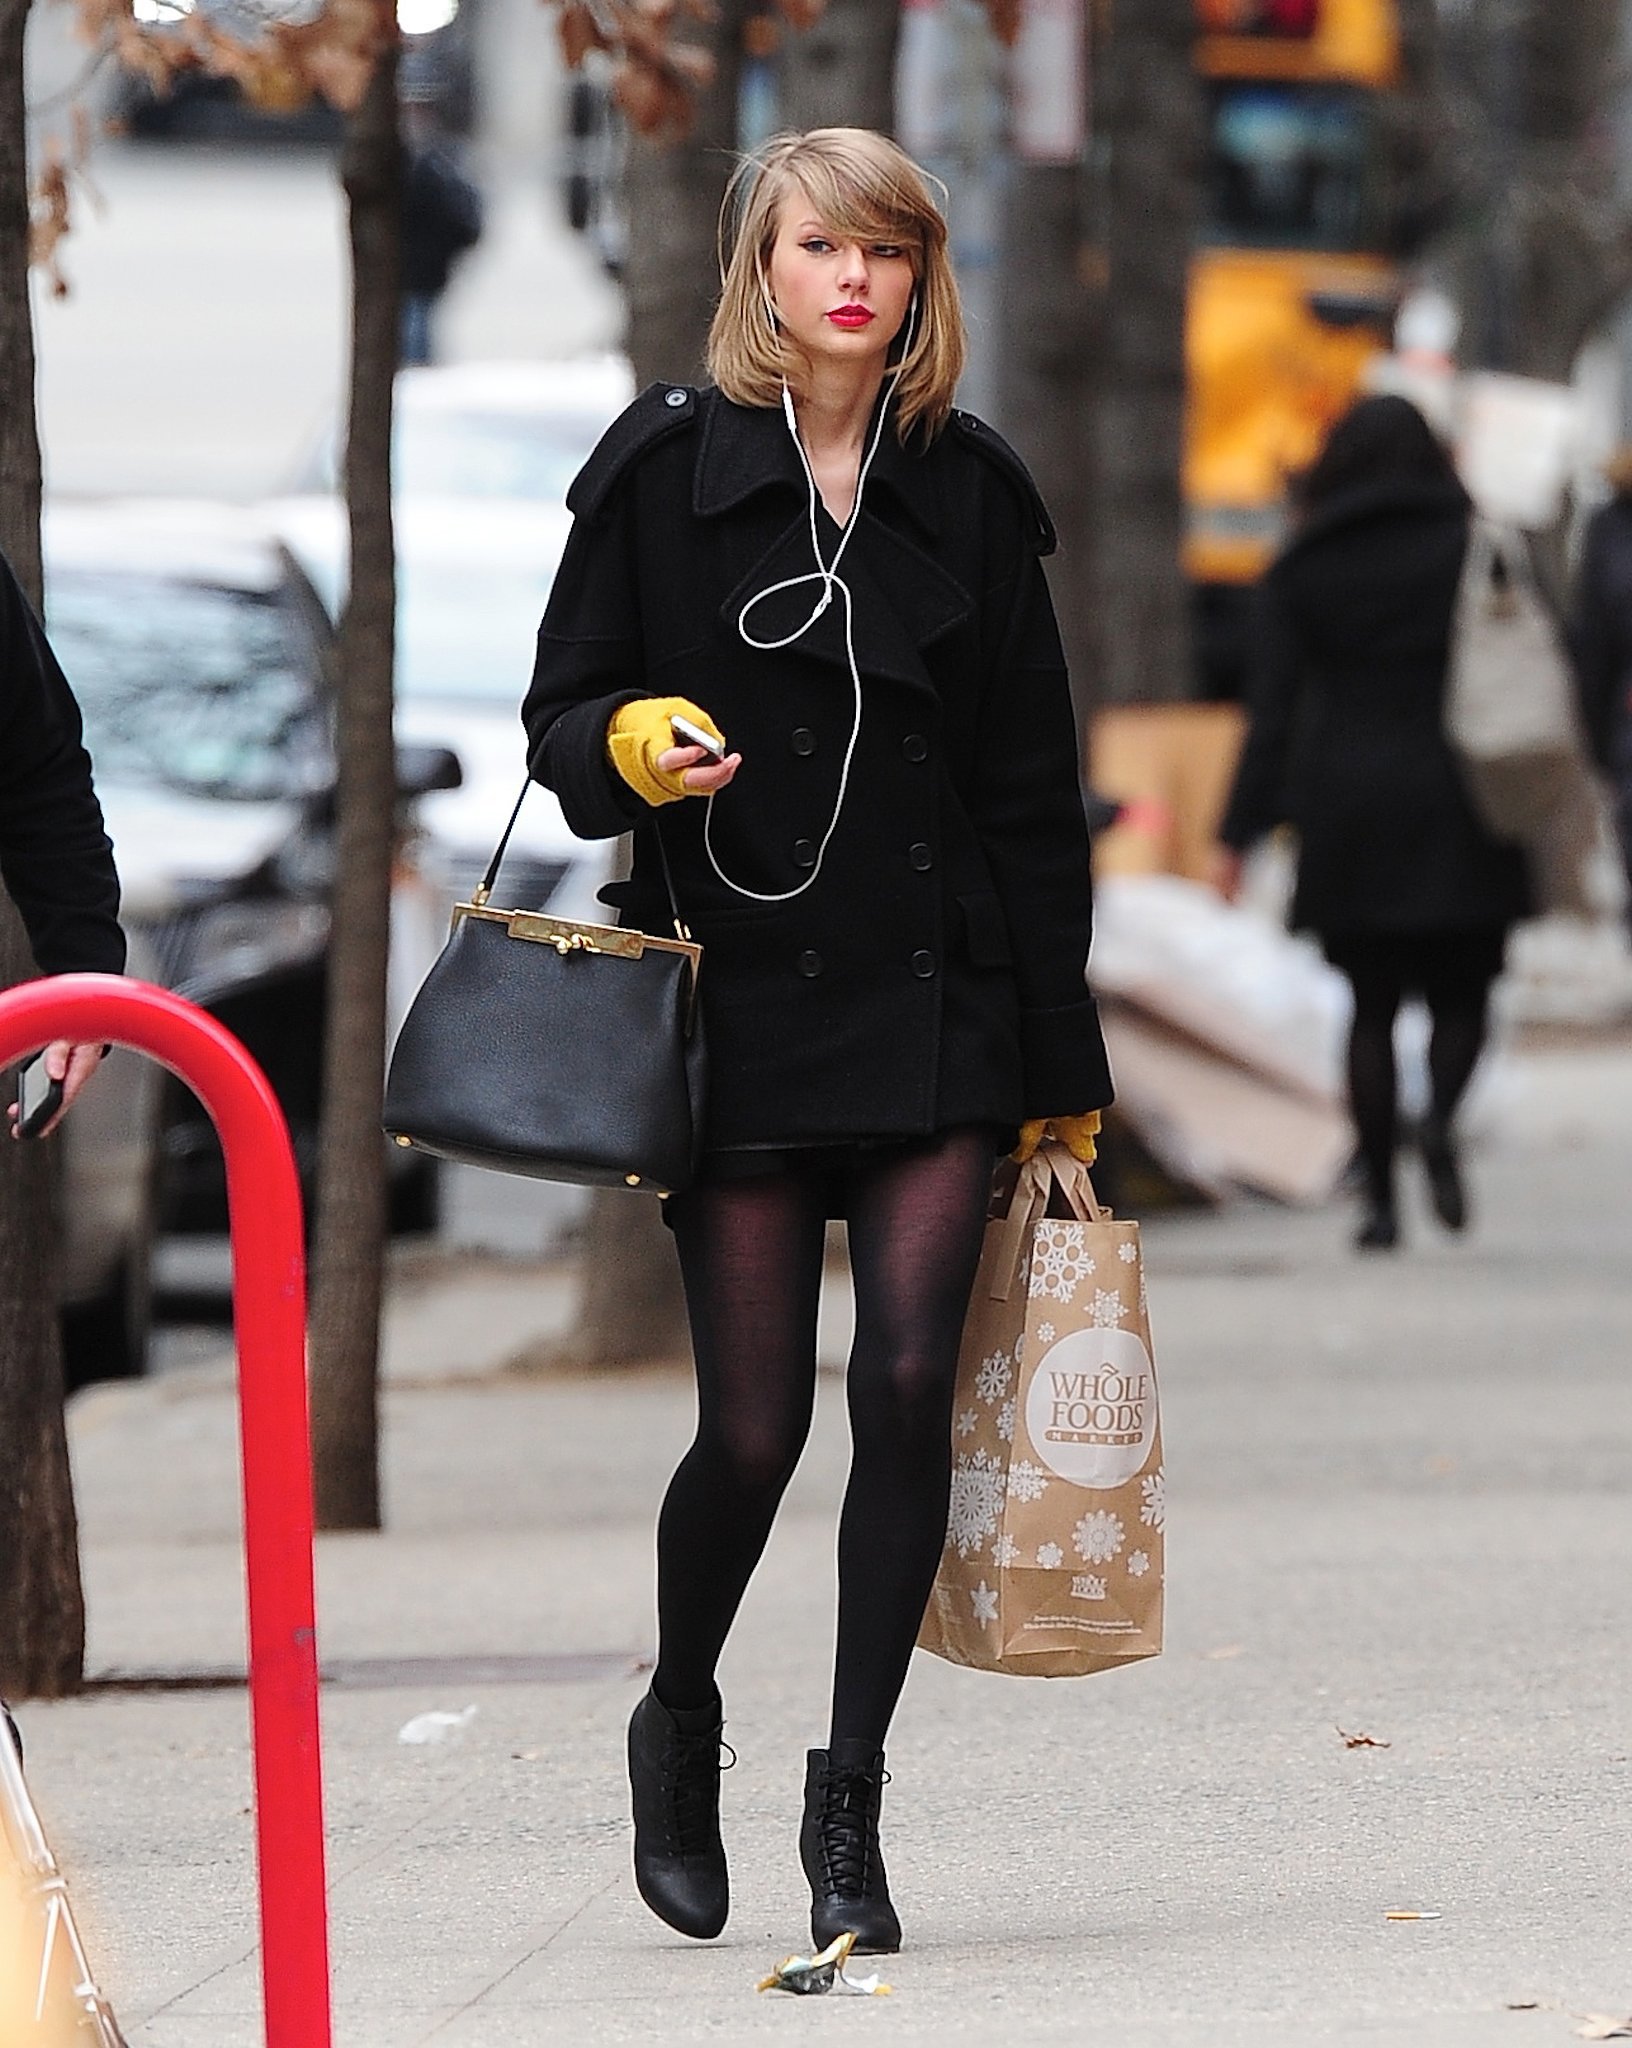 Taylor-Swift-Street-Style In Black Outfit